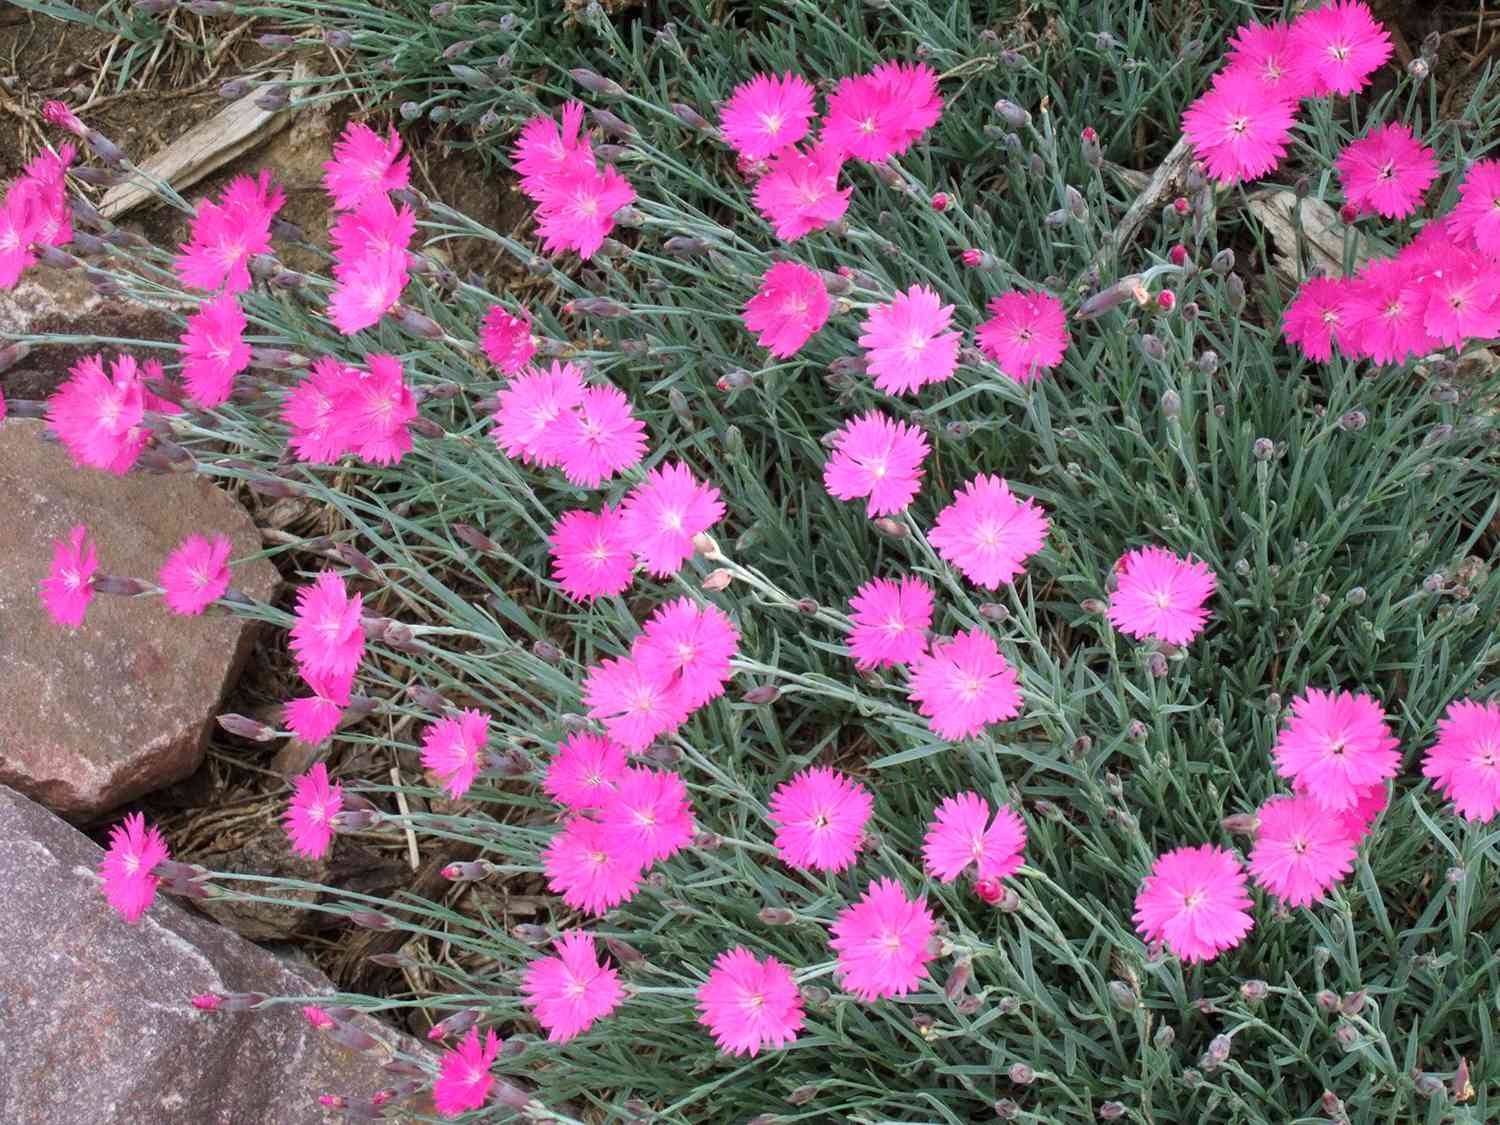 Dianthus Better Homes Gardens,Common Birds In Pa